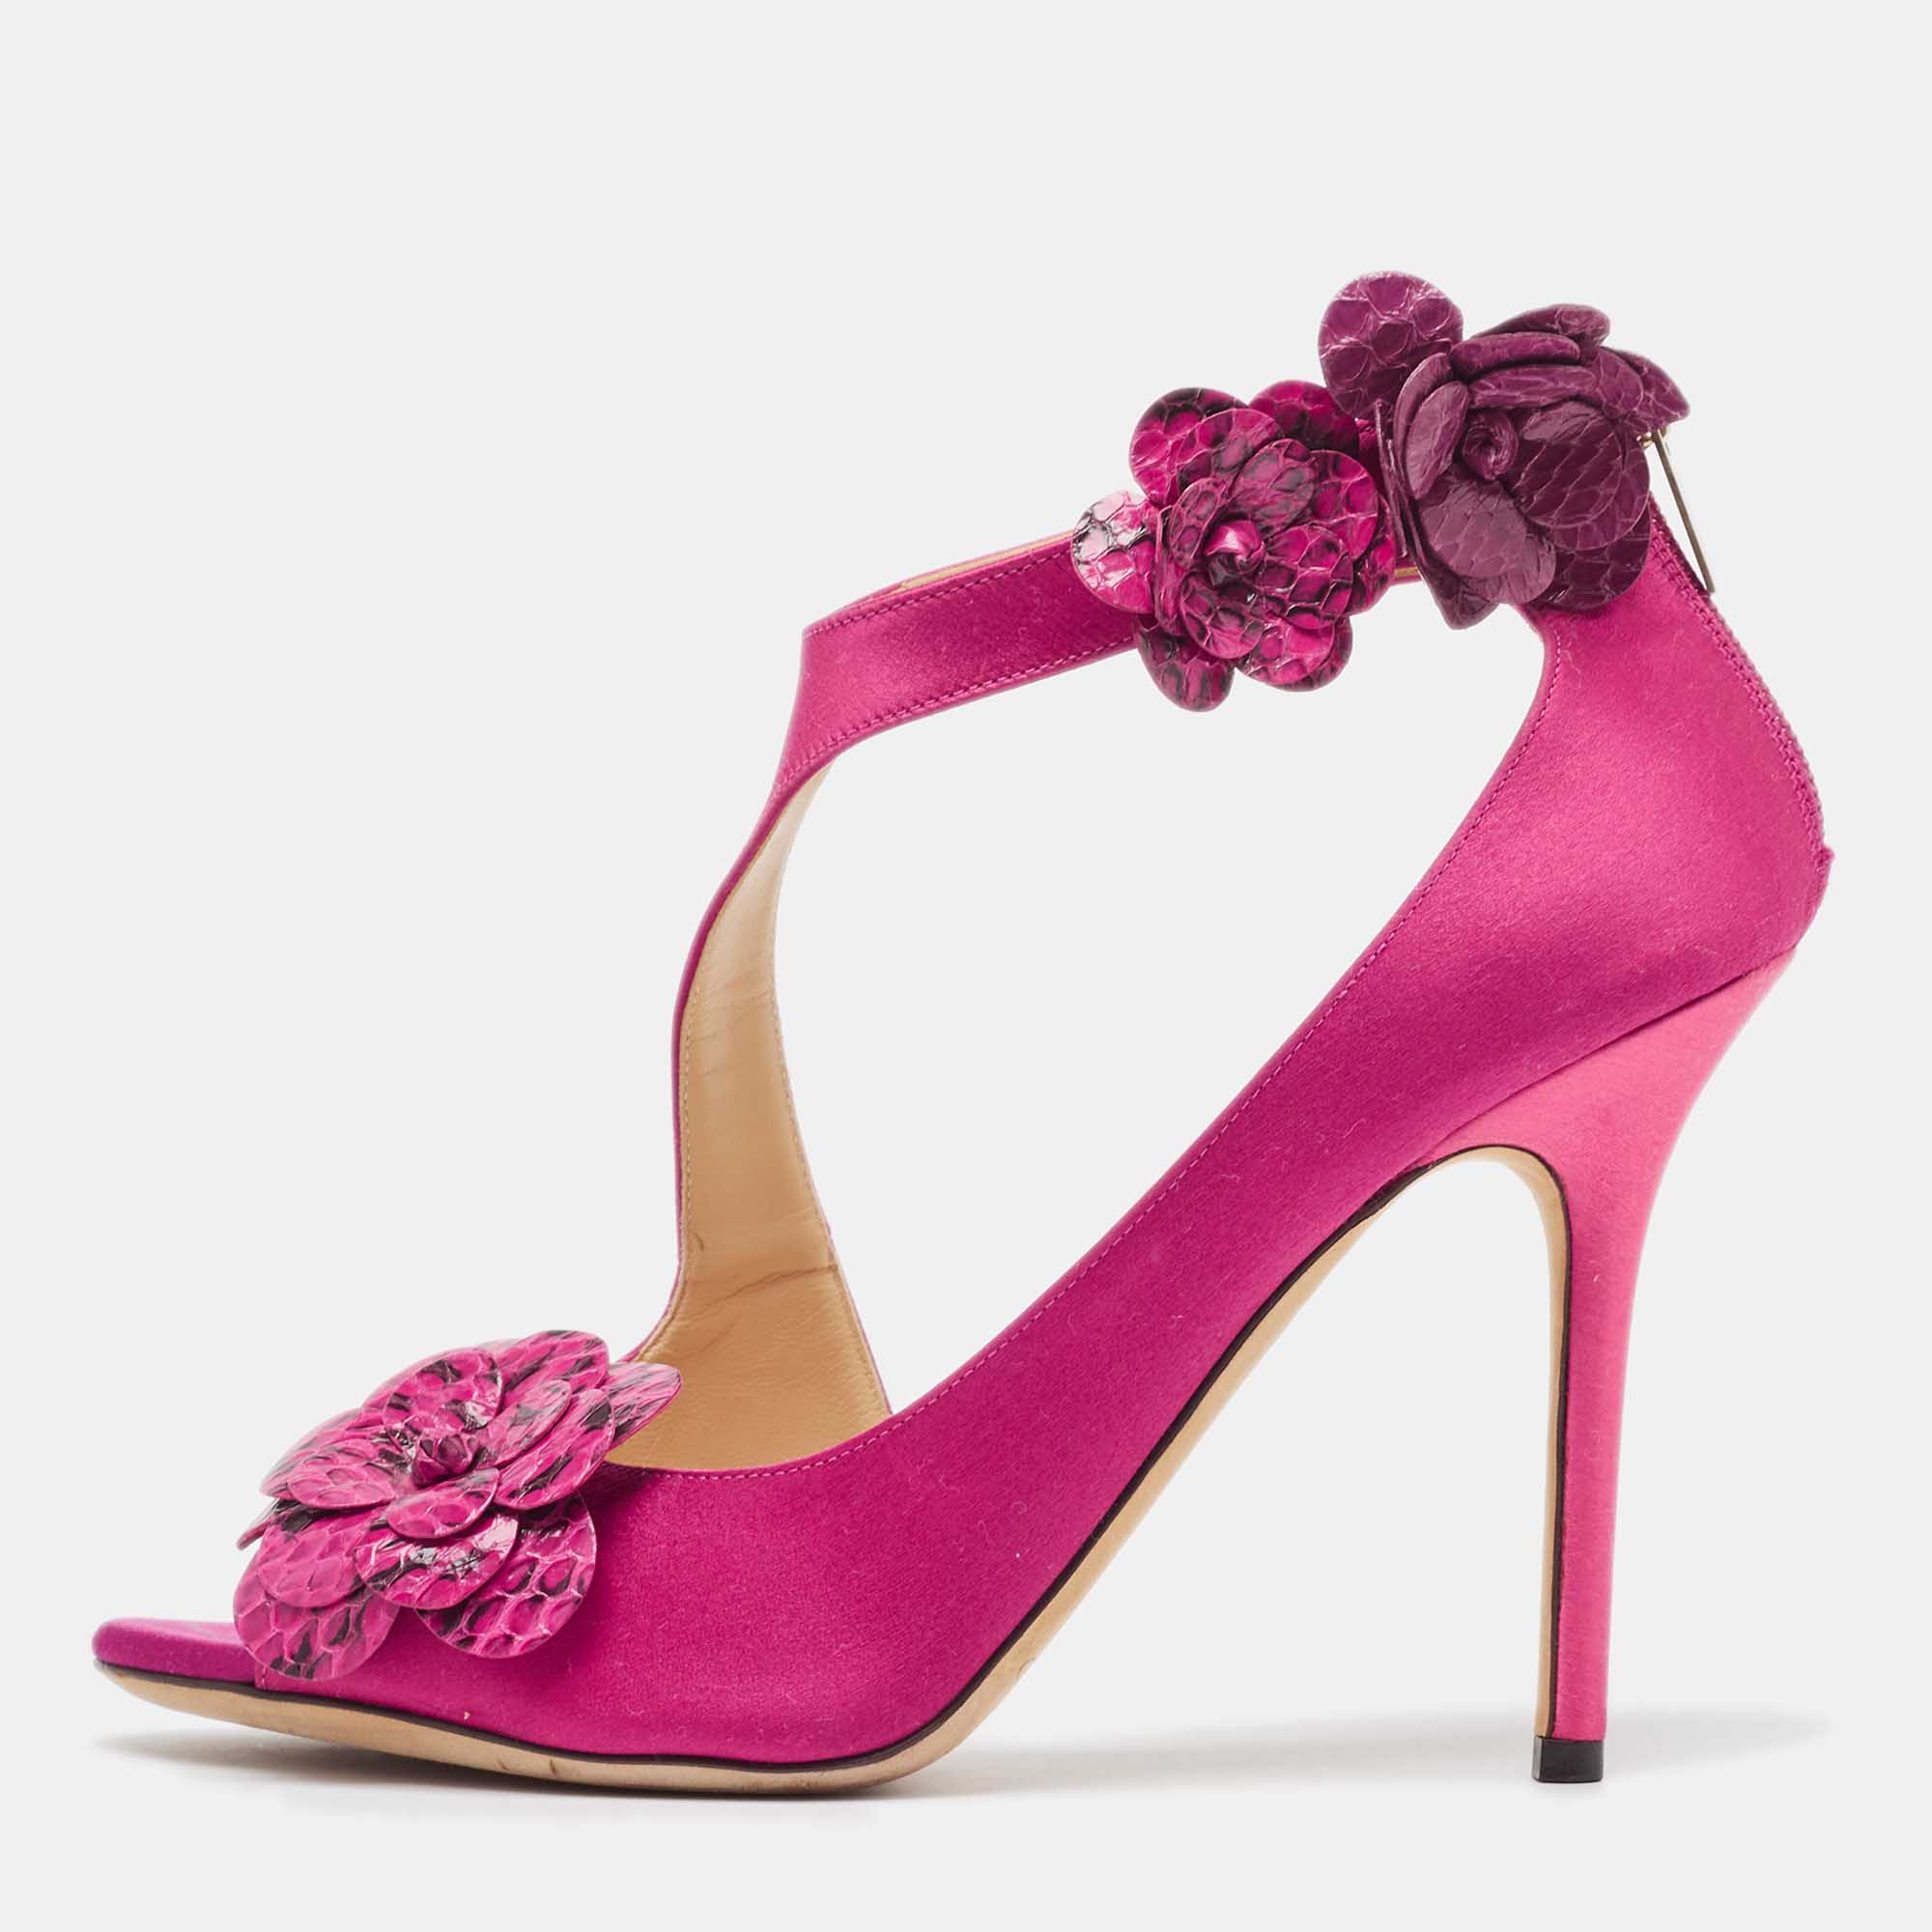 Jimmy choo pink satin and python flower applique sandals size 39.5